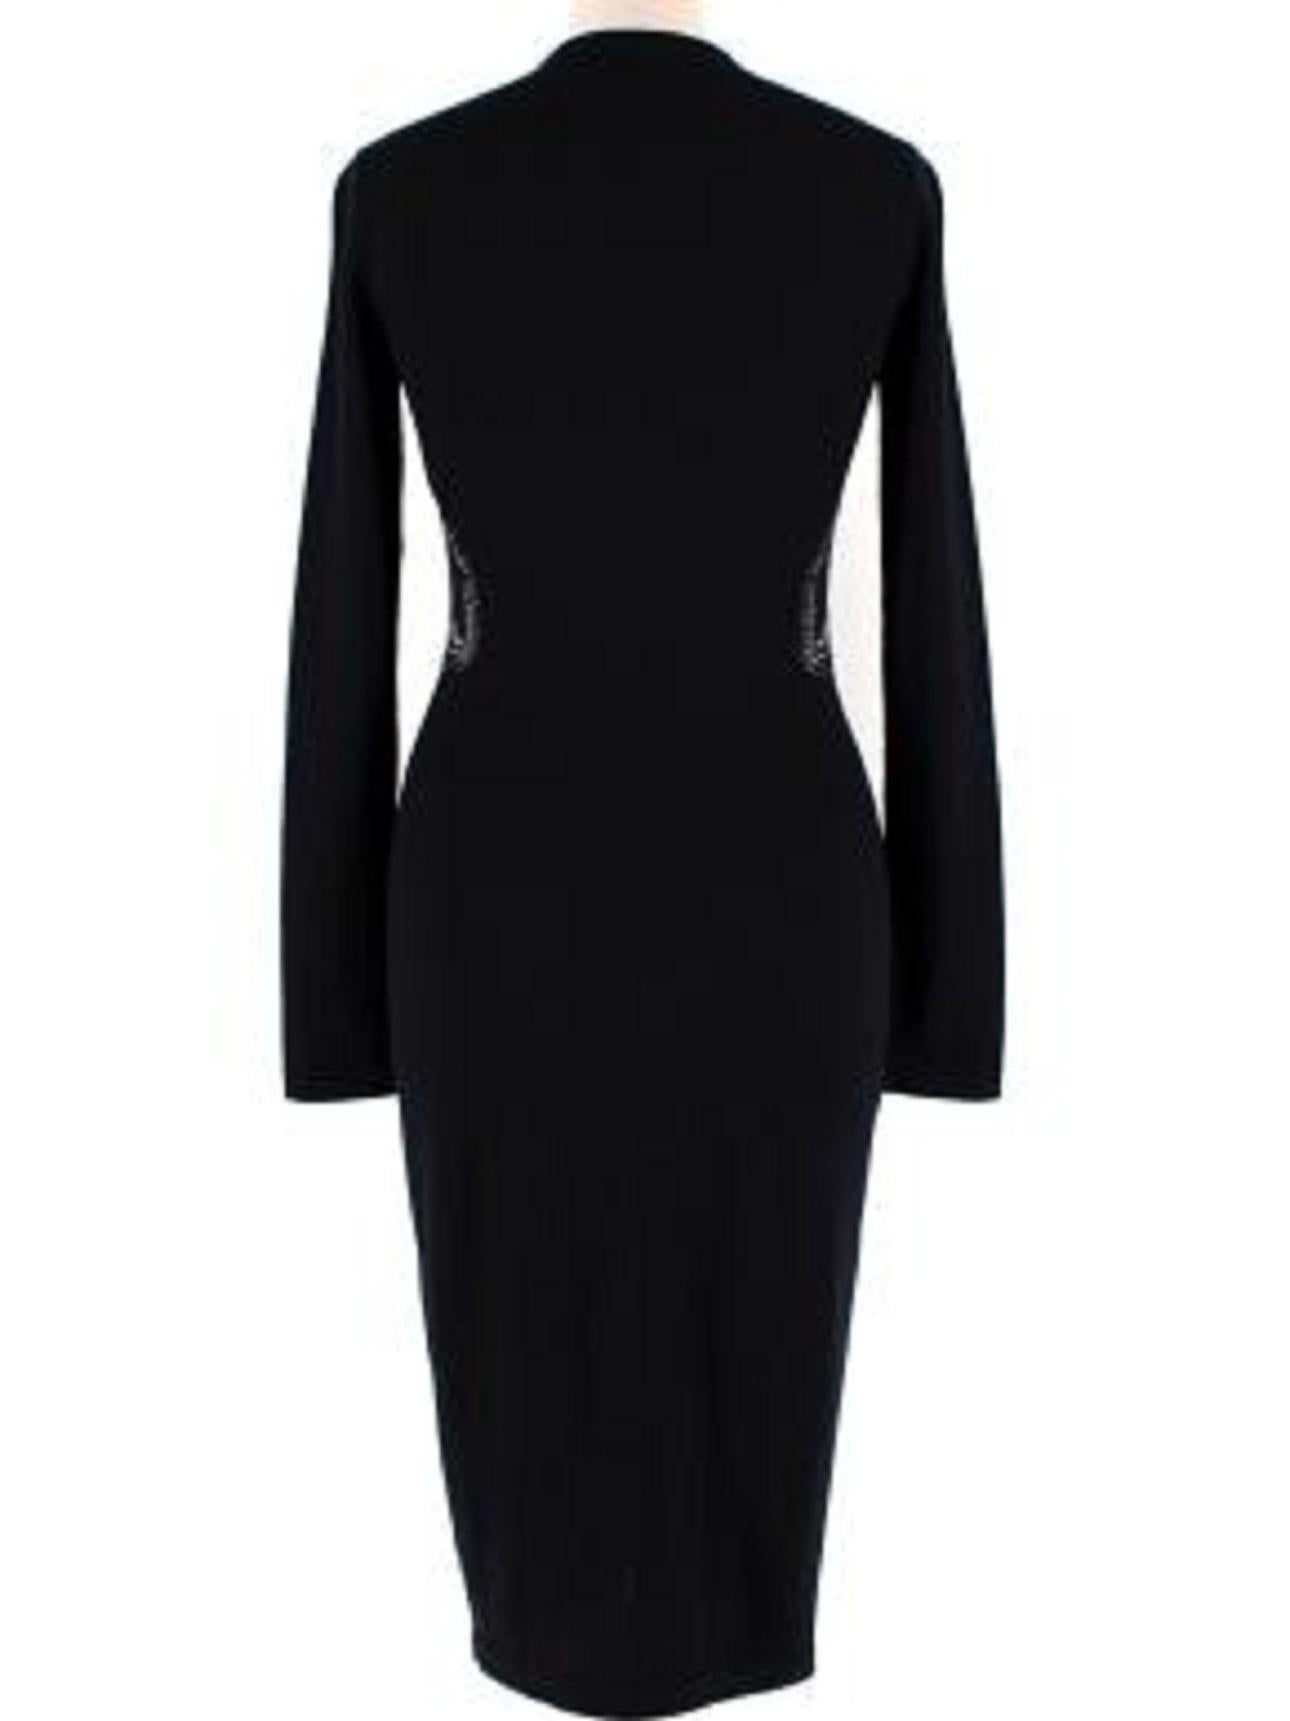 Alexander McQueen Black Fitted Knitted Dress In Excellent Condition For Sale In London, GB